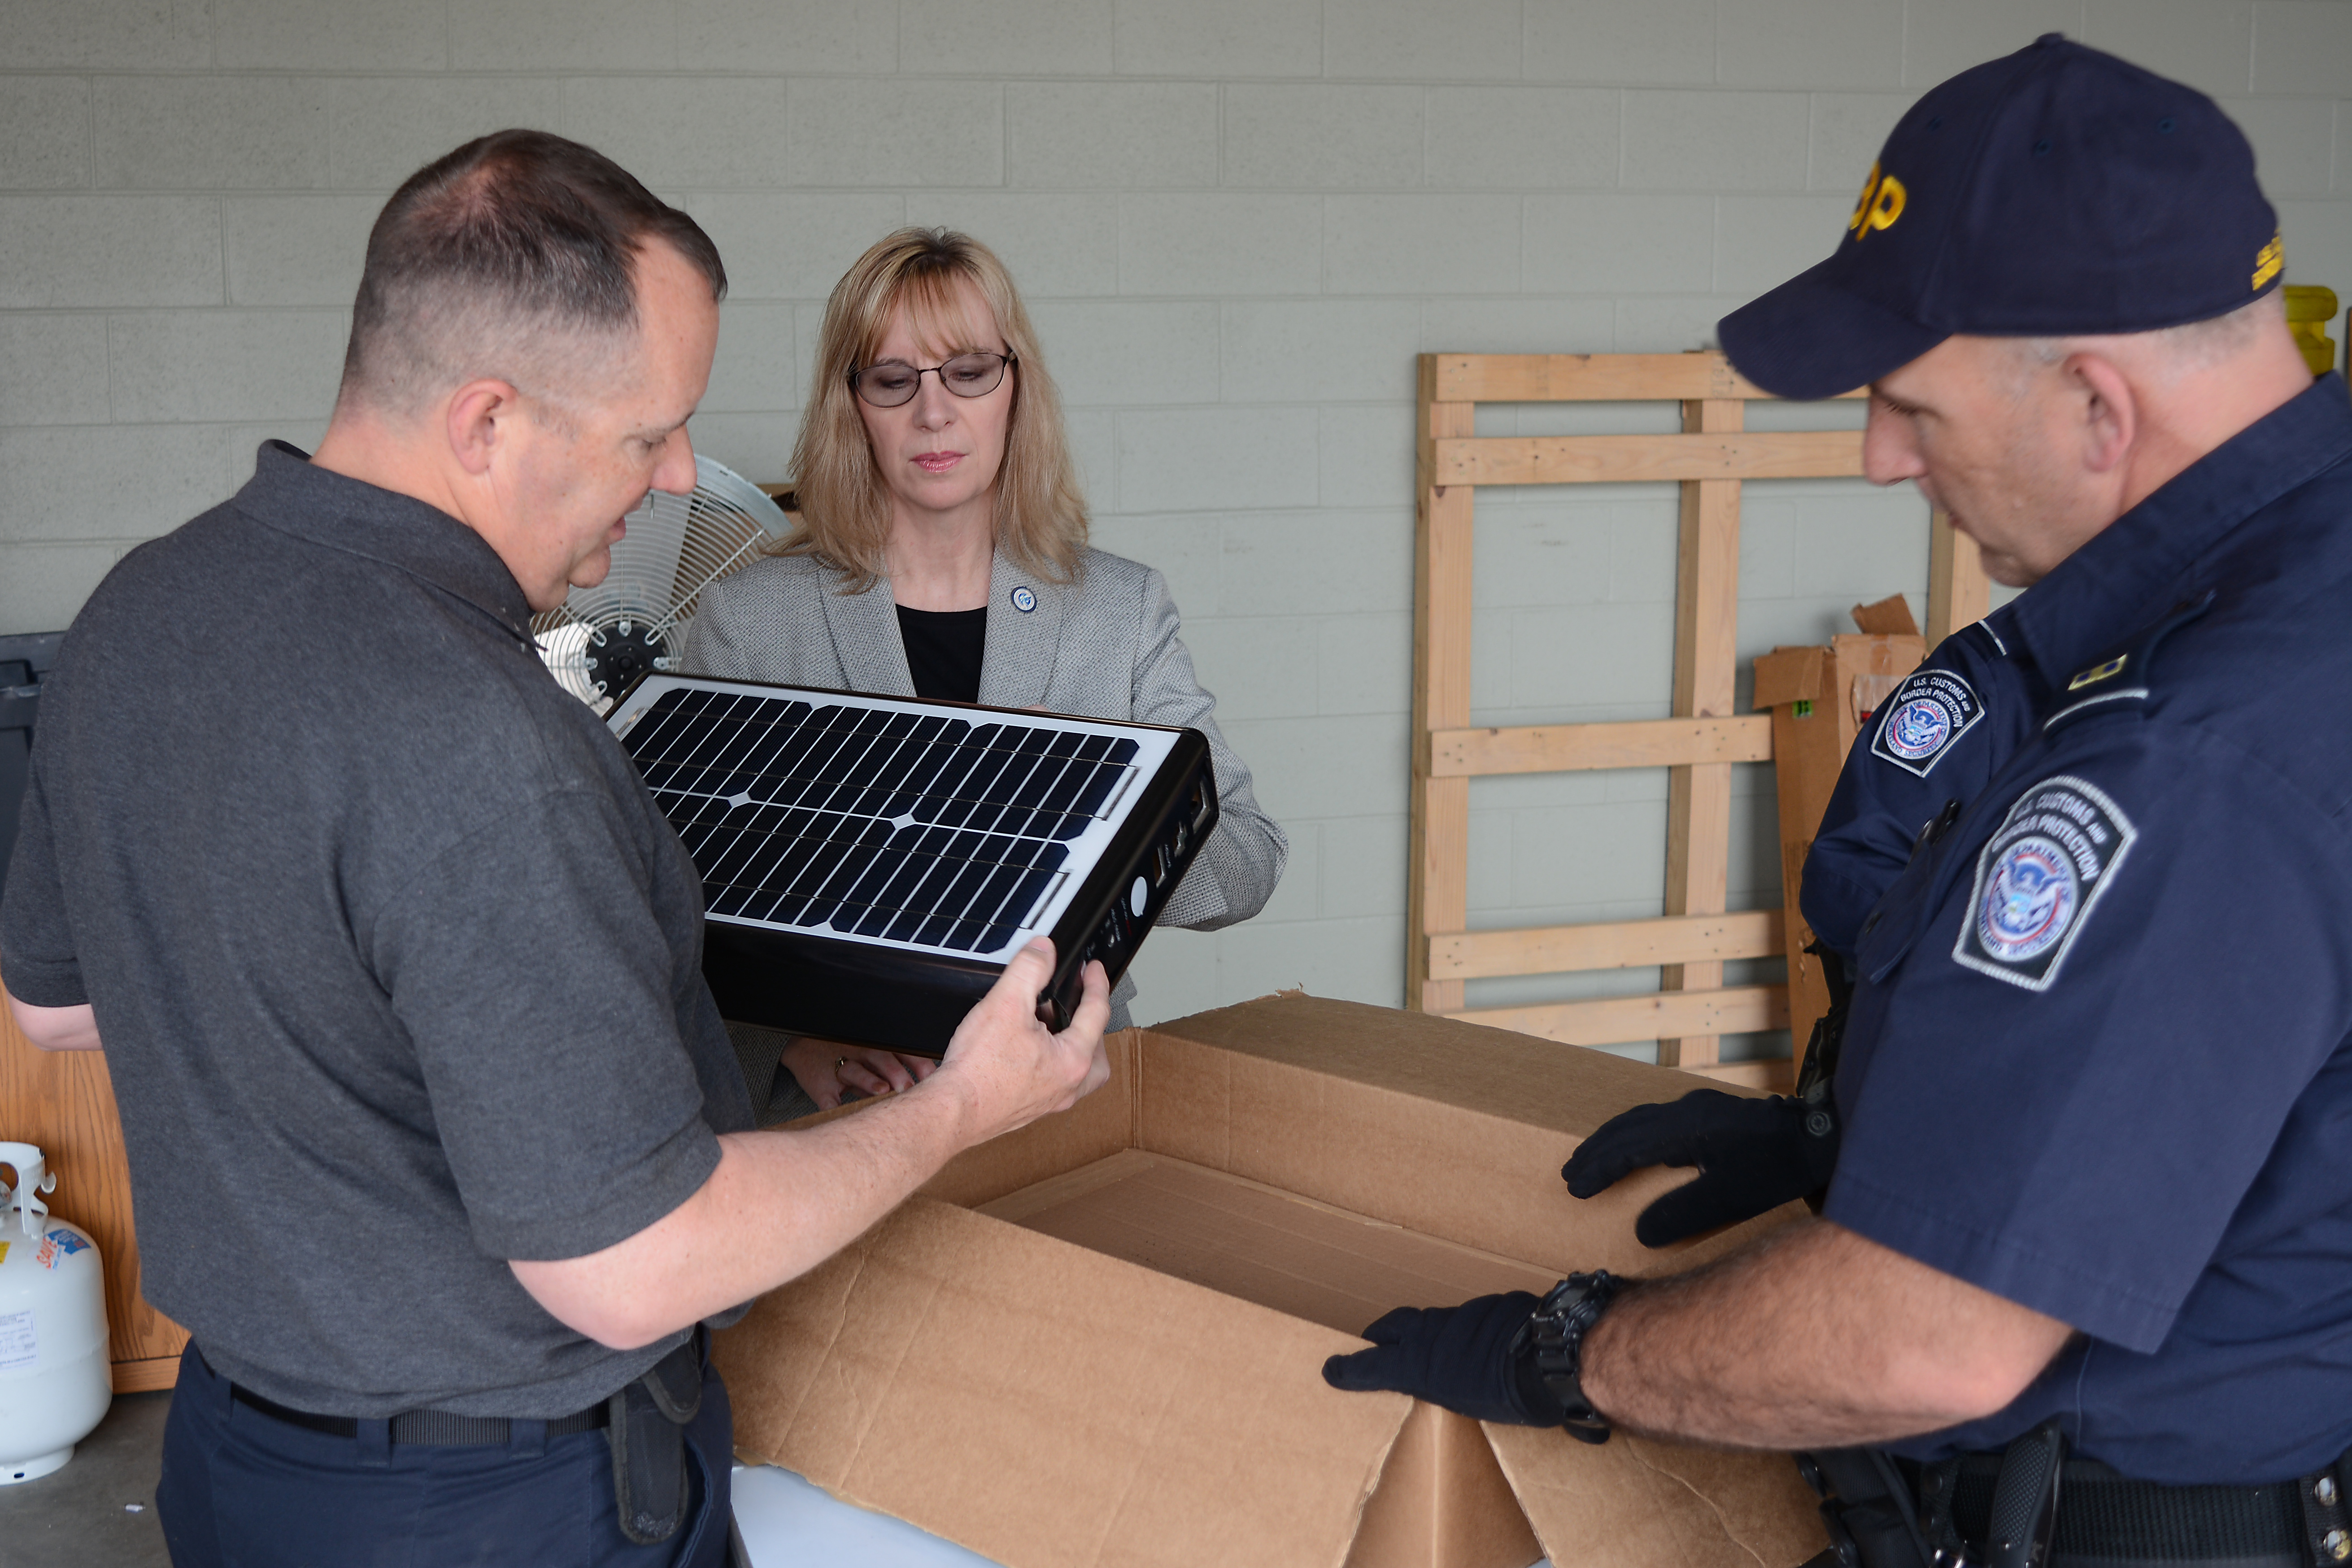 Import Specialist Jeff Sorrells, left, unpacks a “solar suitcase” with CBP Officer Robert Boswell, right, and Senior Import Specialist Laurie Pazzo as part of Operation Solar Flare. Photo by Scott Sams